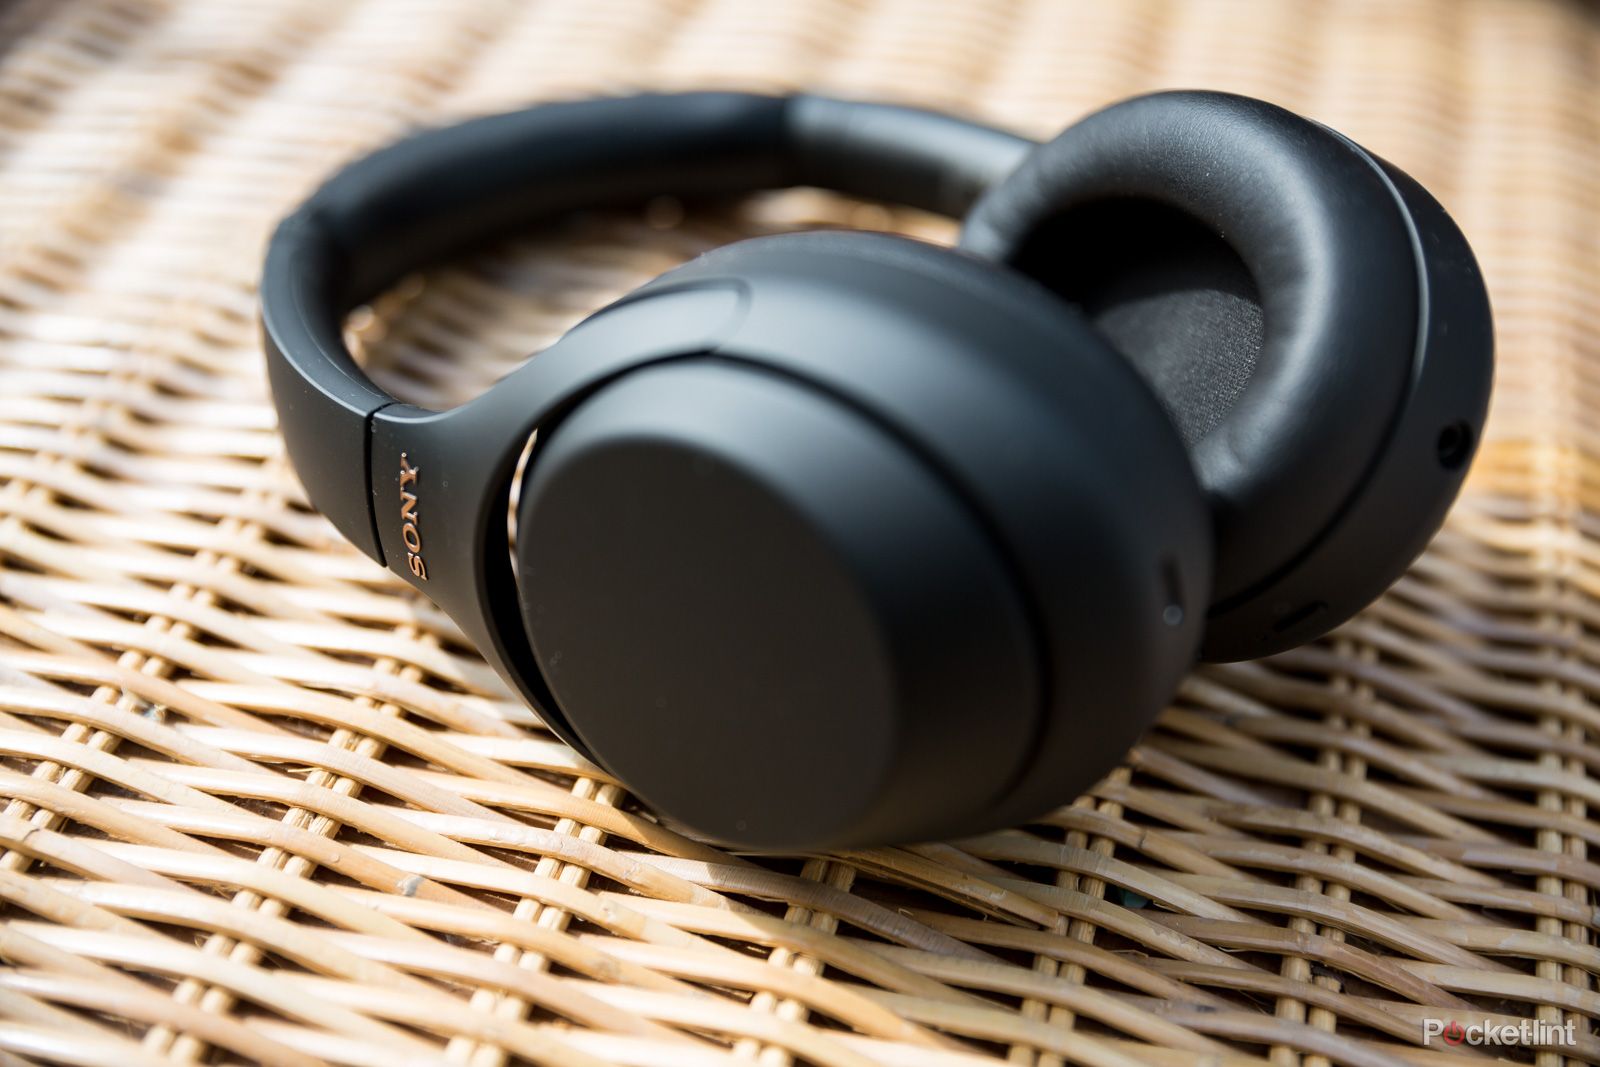 Our favorite noise cancelling headphones are still on sale even after Black Friday